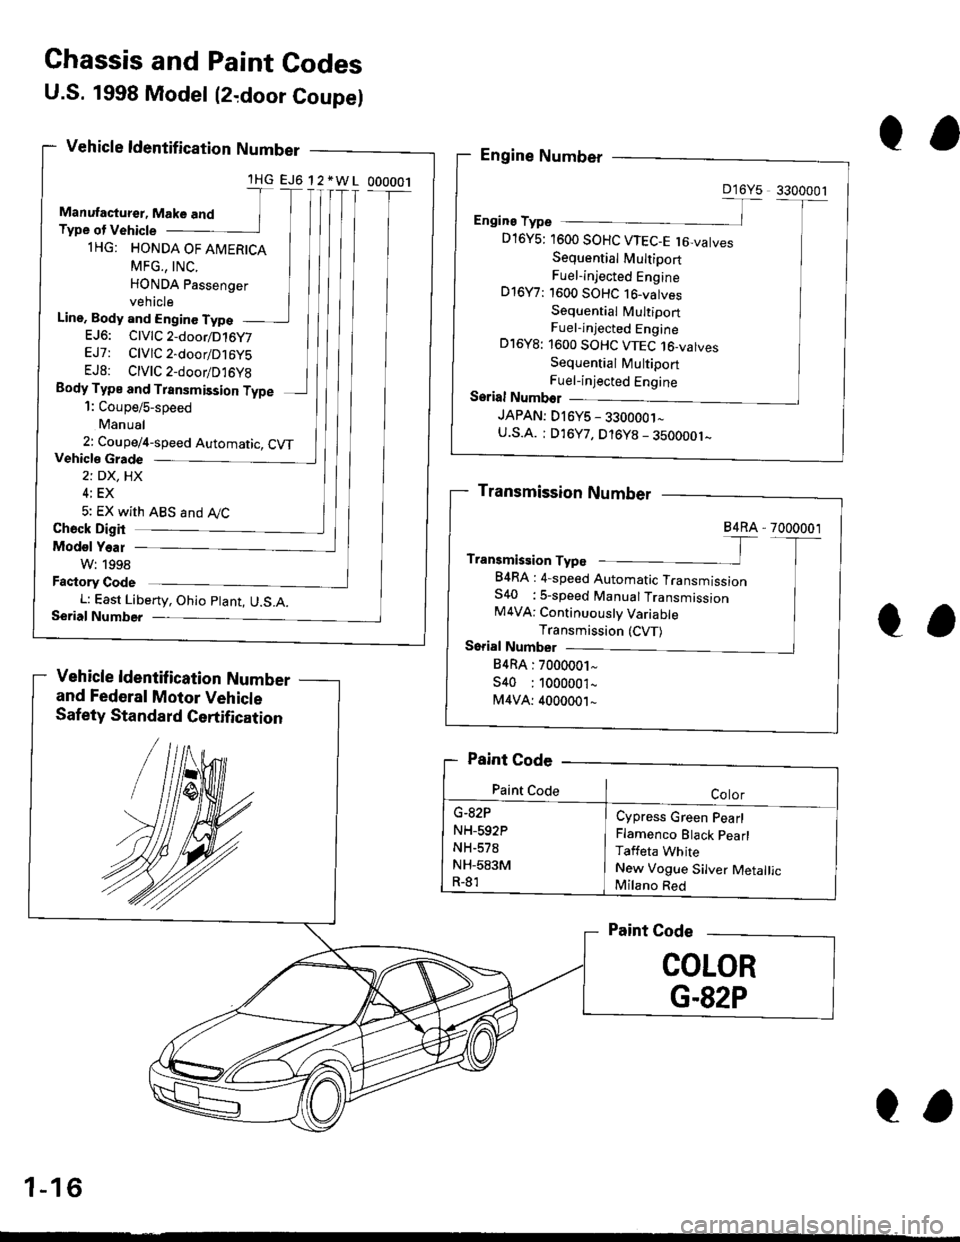 HONDA CIVIC 1999 6.G Workshop Manual Ghassis and Paint Codes
U.S. 1998 Model (2,door Coupel
Vehicle ldentif ication Number
and Federal Motor Vehicle
Safety Standard Certification
lHG EJ6 12*WL 000001
Line, Body and Enginc TypeEJ6: ClVlC2